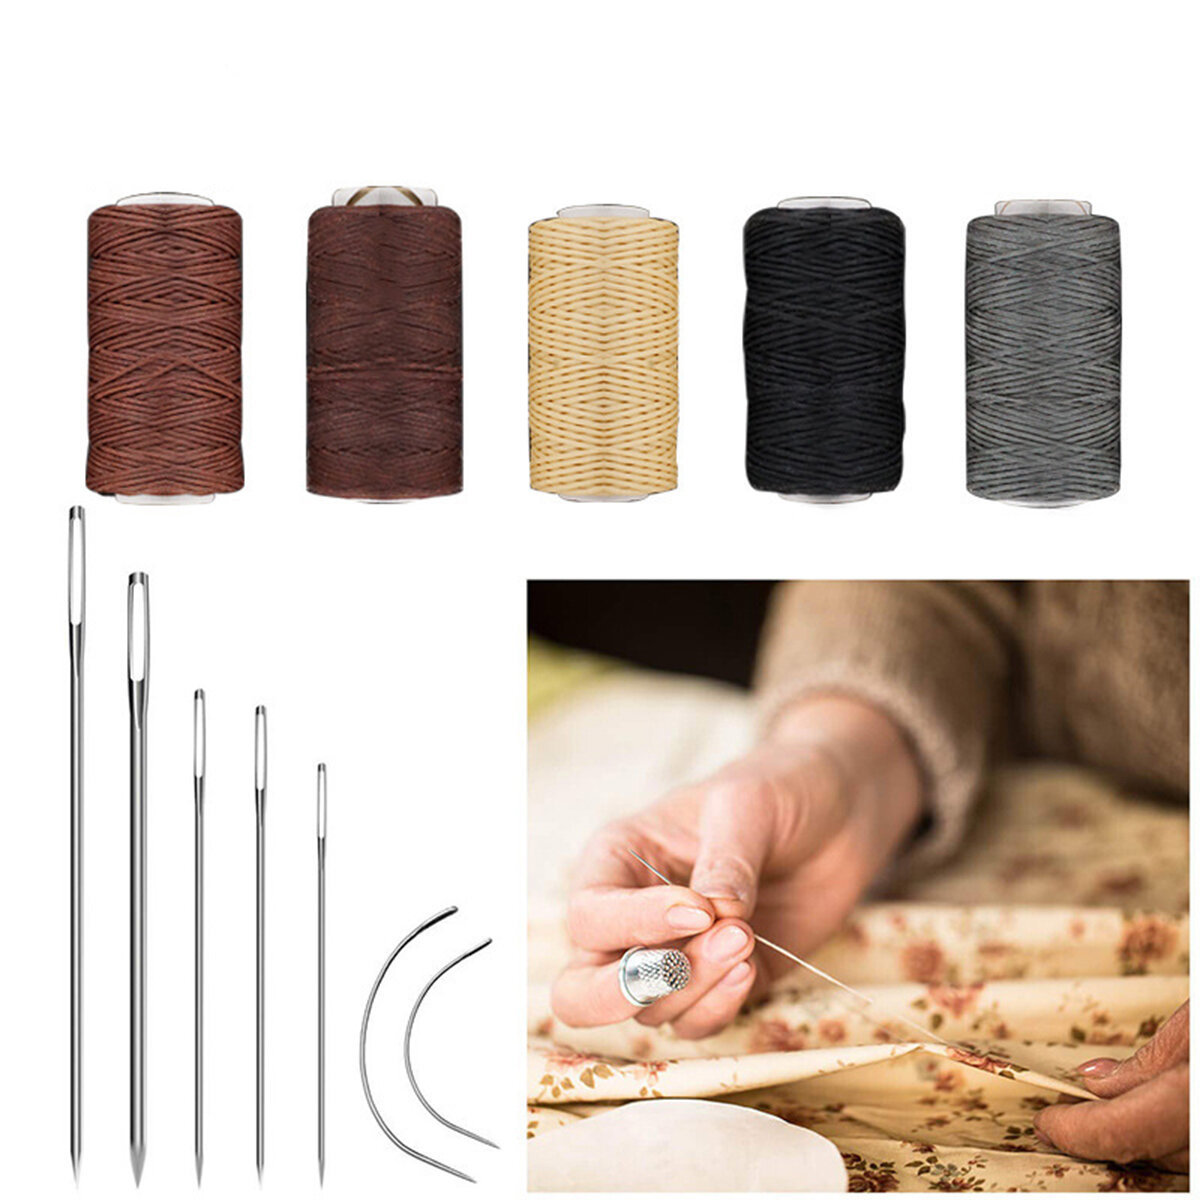 28/18/48/59pcs Professional Leather Craft Tools Kit for Hand Sewing Sewing  Stitching Working Wheels Stamping Punch Tools Set